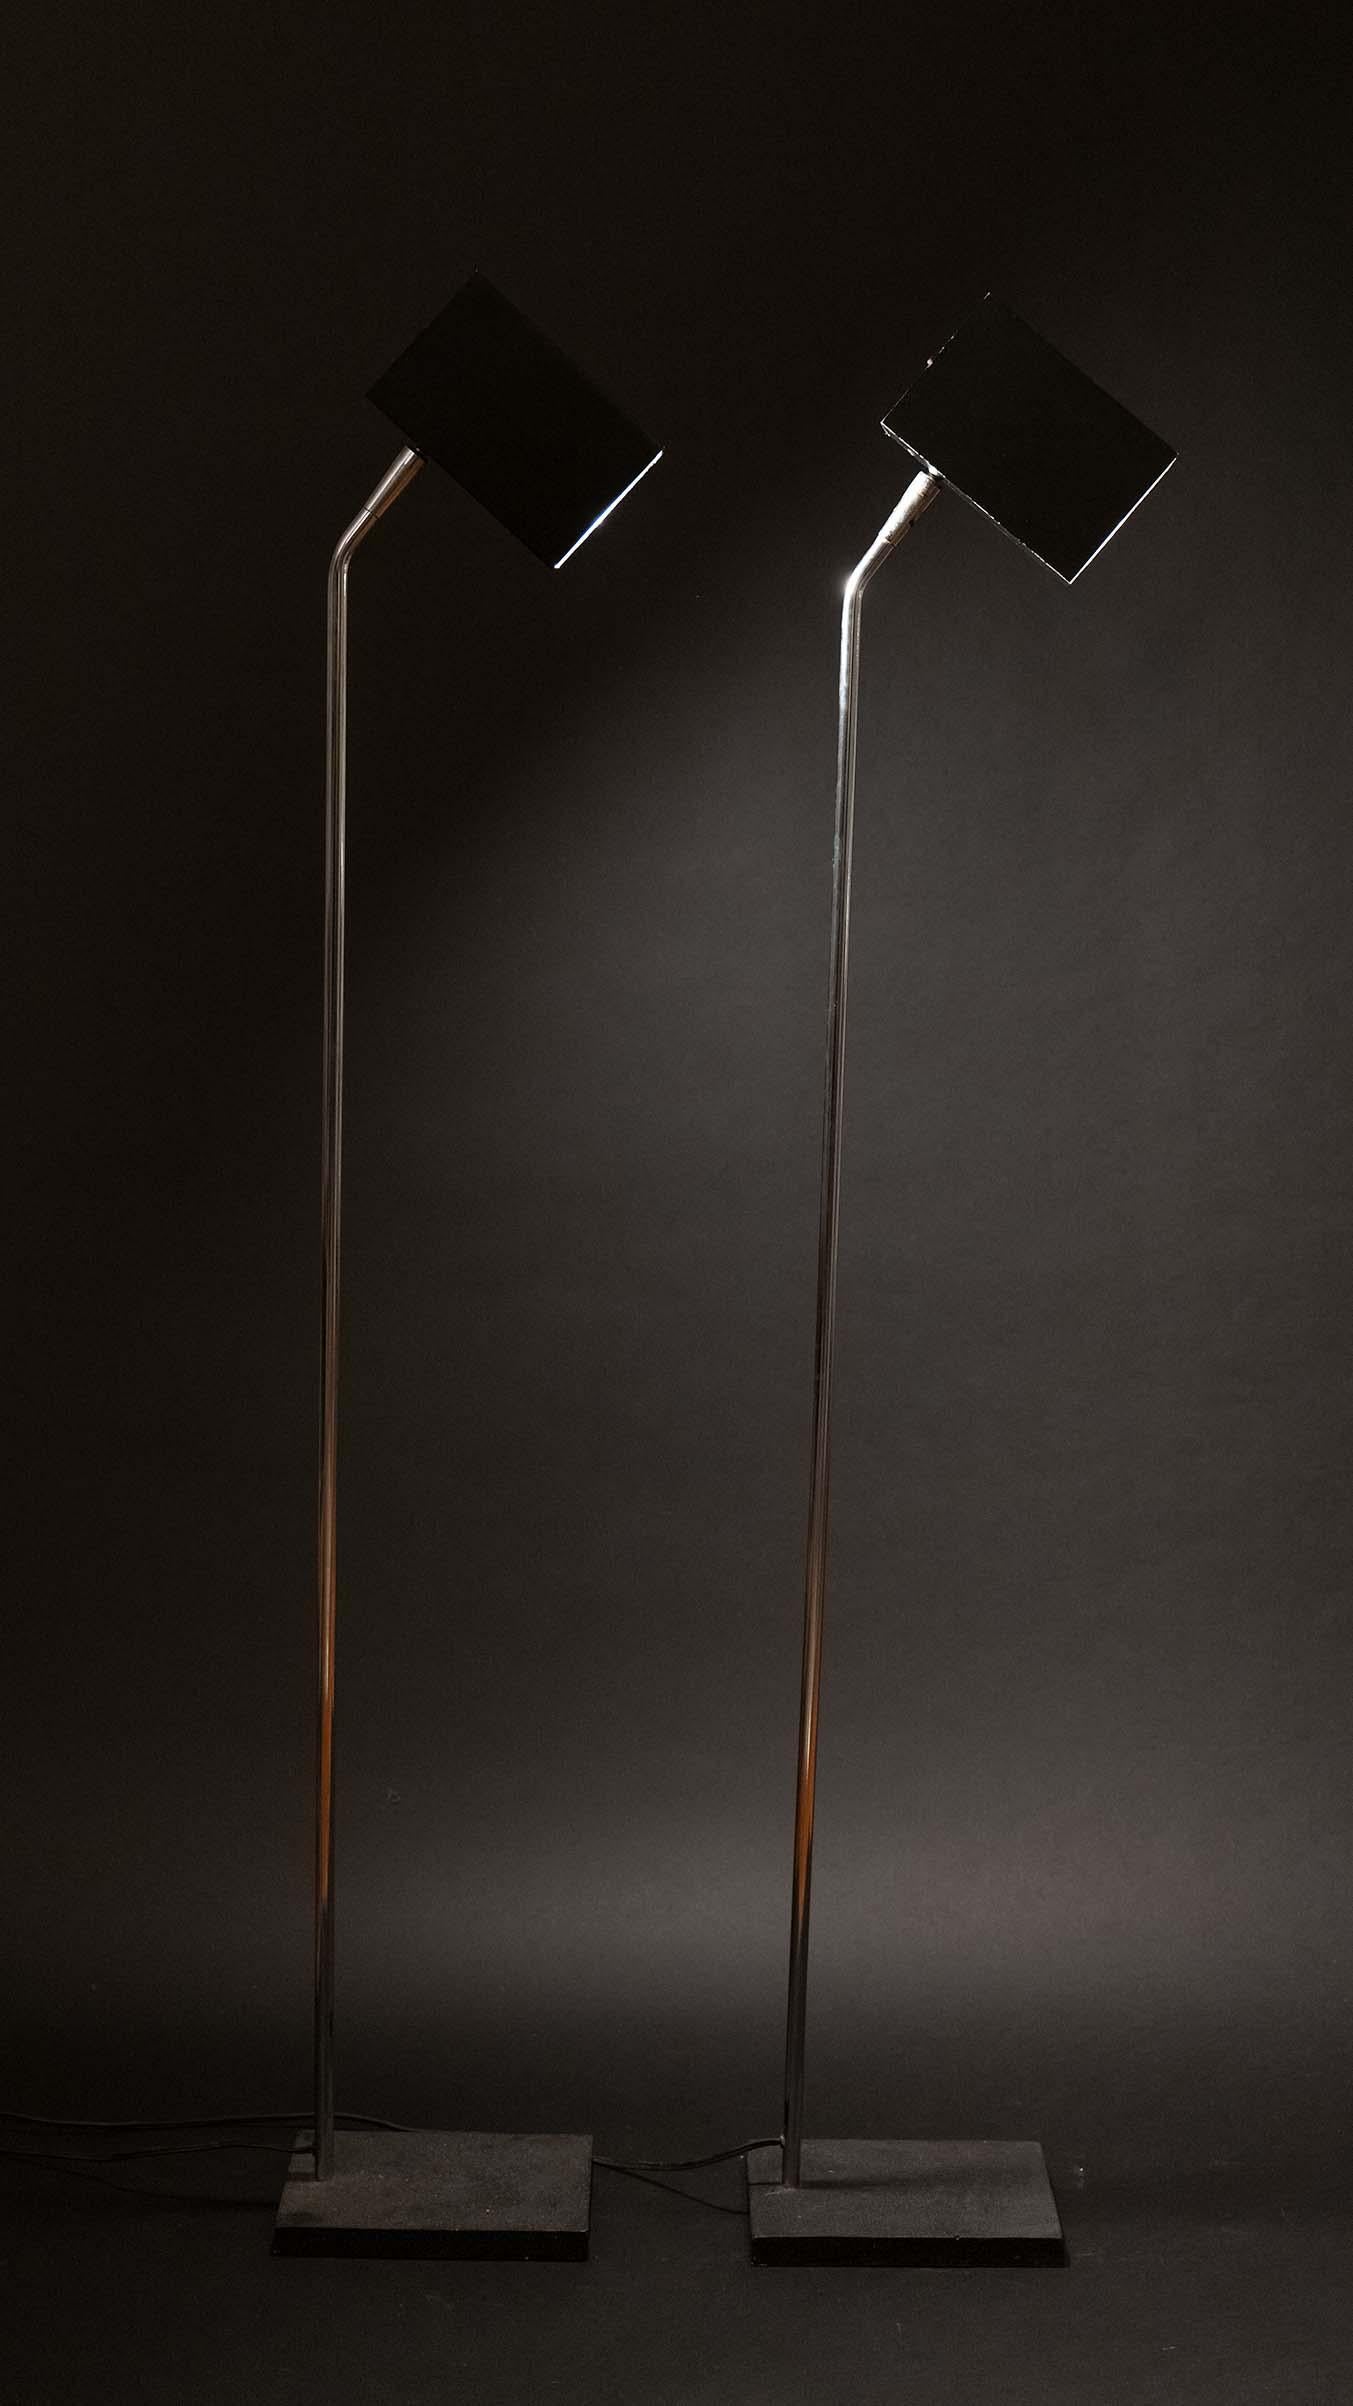 Cubist form, designed by Robert Sonneman for George Kovacs (labeled)

These floor lamps are a geometric and sleek addition to any space, each box head can be rotated and adjusted in many directions. Heavy bases provide strong support. 

Available as